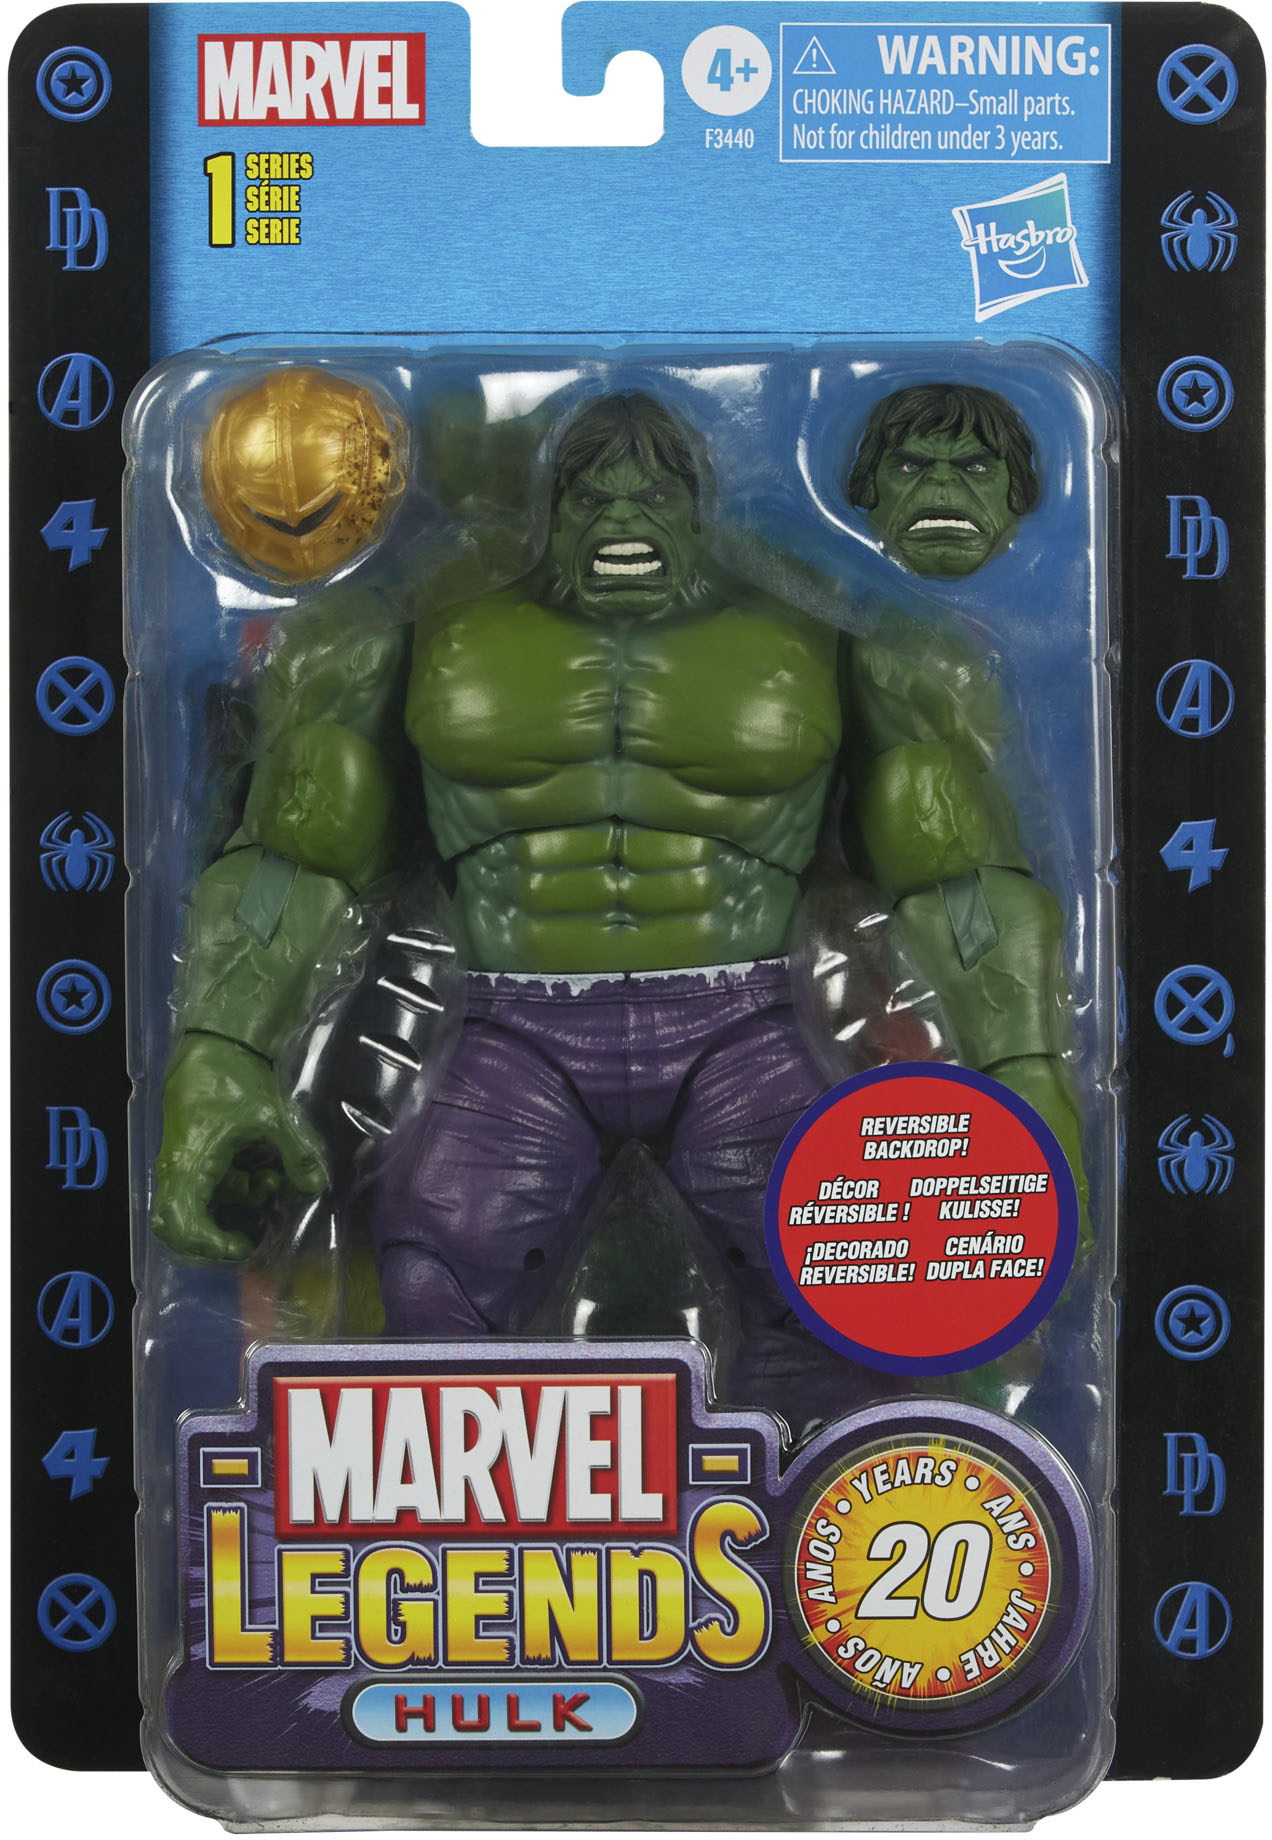 Toy Biz Marvel Collector Editions The Original Avengers 6 Figure Boxed Set MISB for sale online 